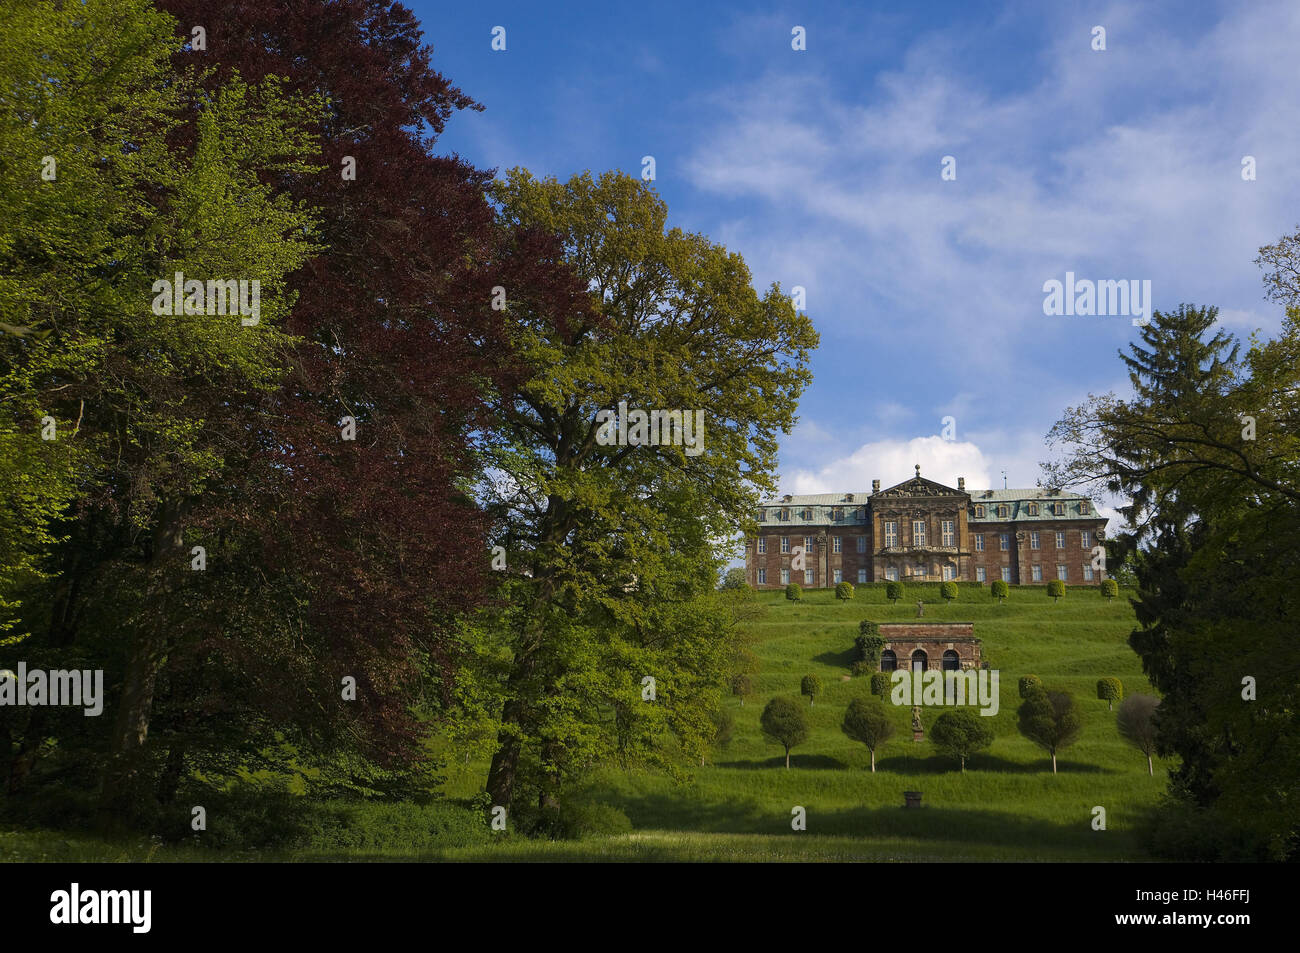 Germany, Saxony-Anhalt, Burgenland circle, castle castle separations with castle grounds, Stock Photo